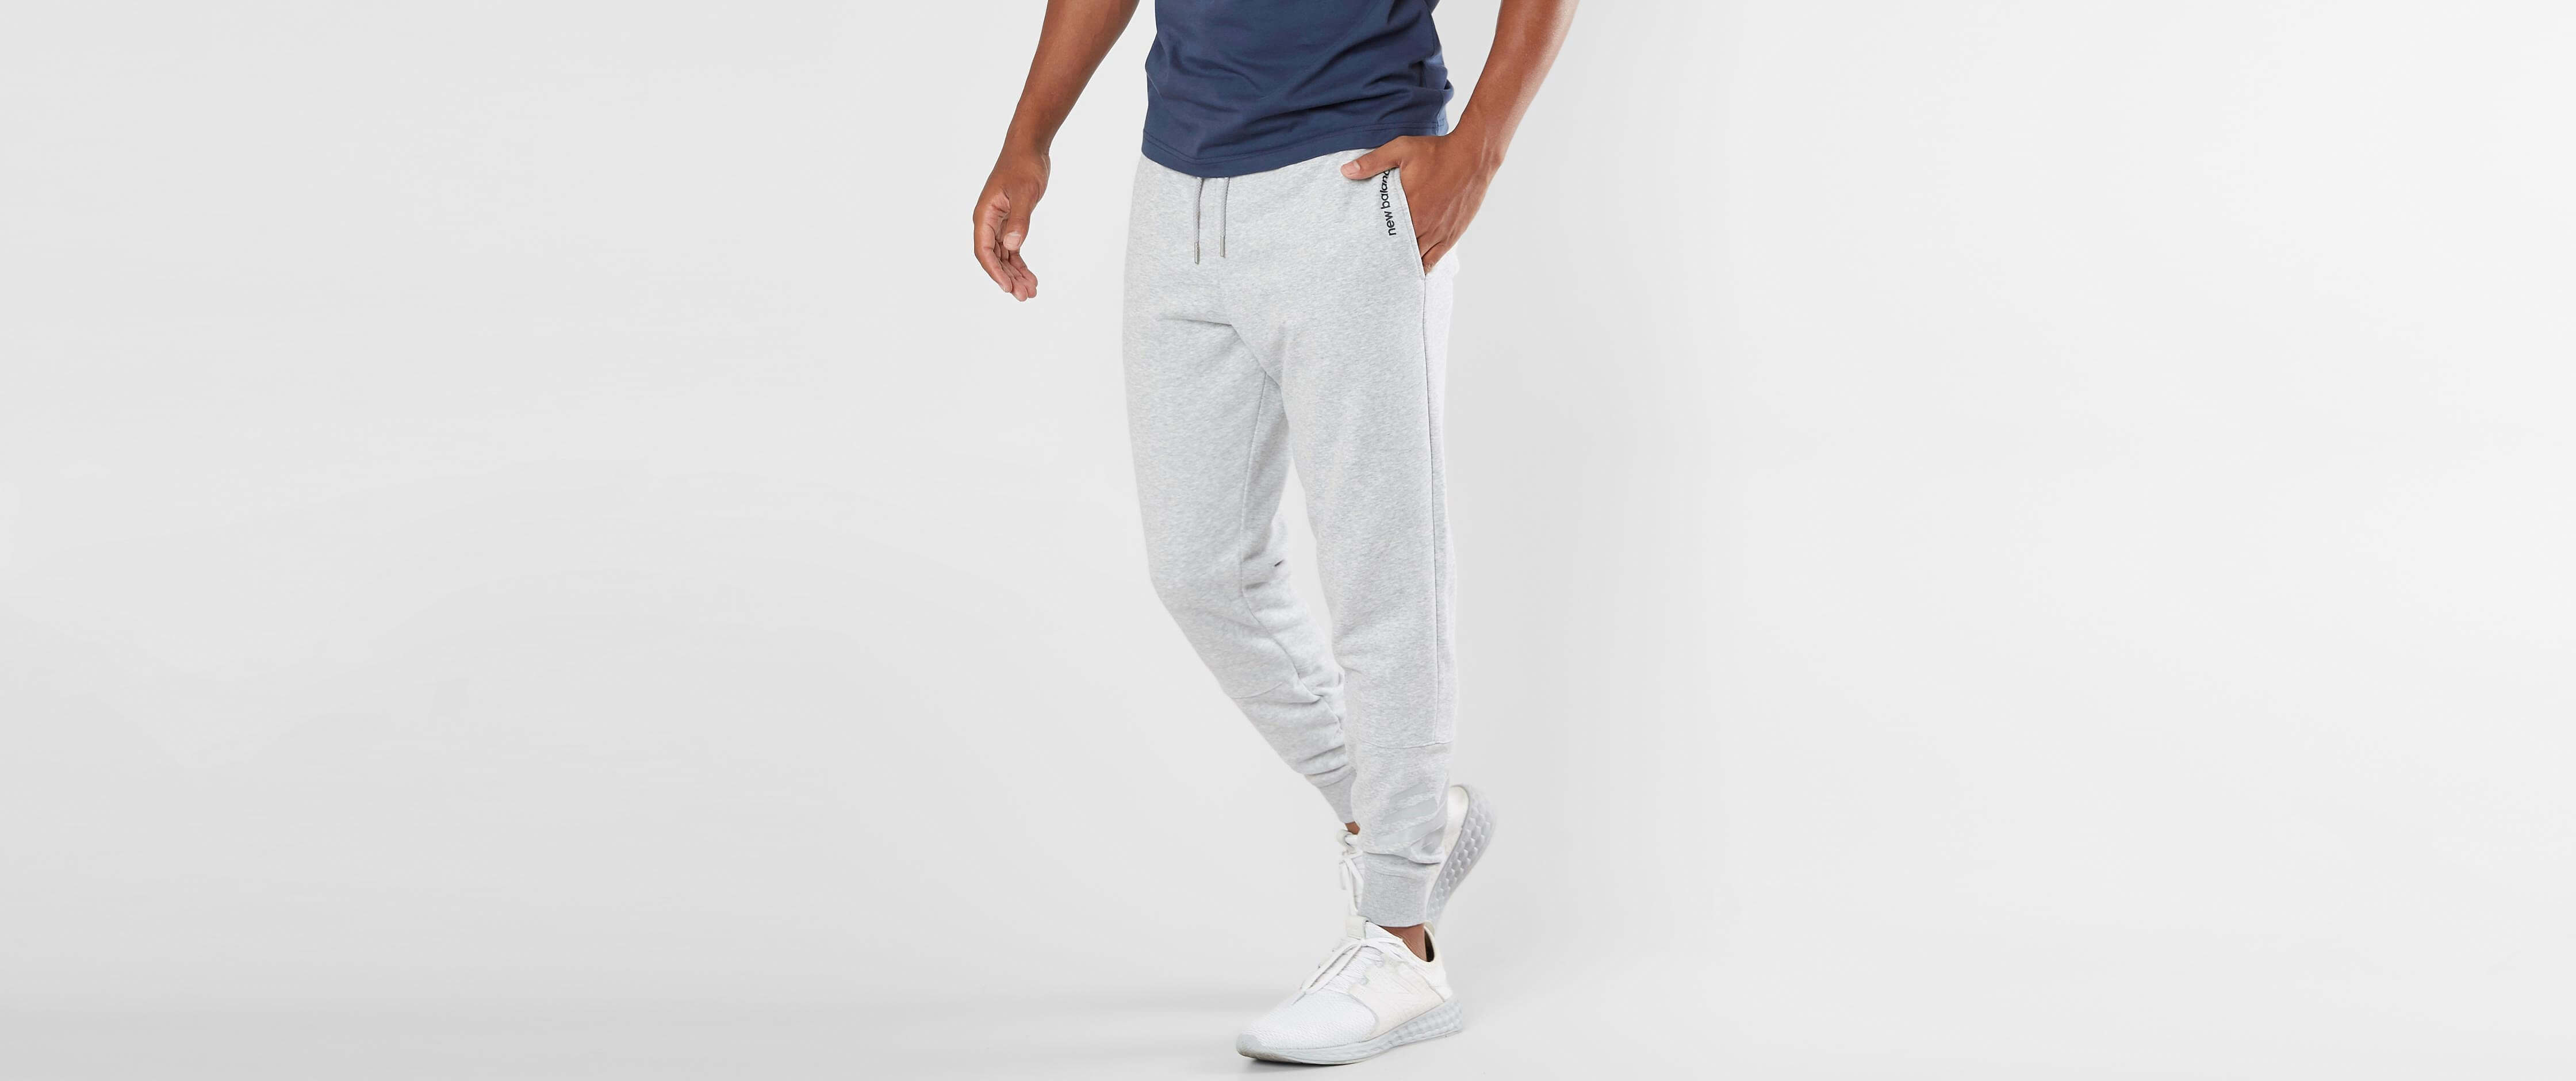 are nite joggers good for running